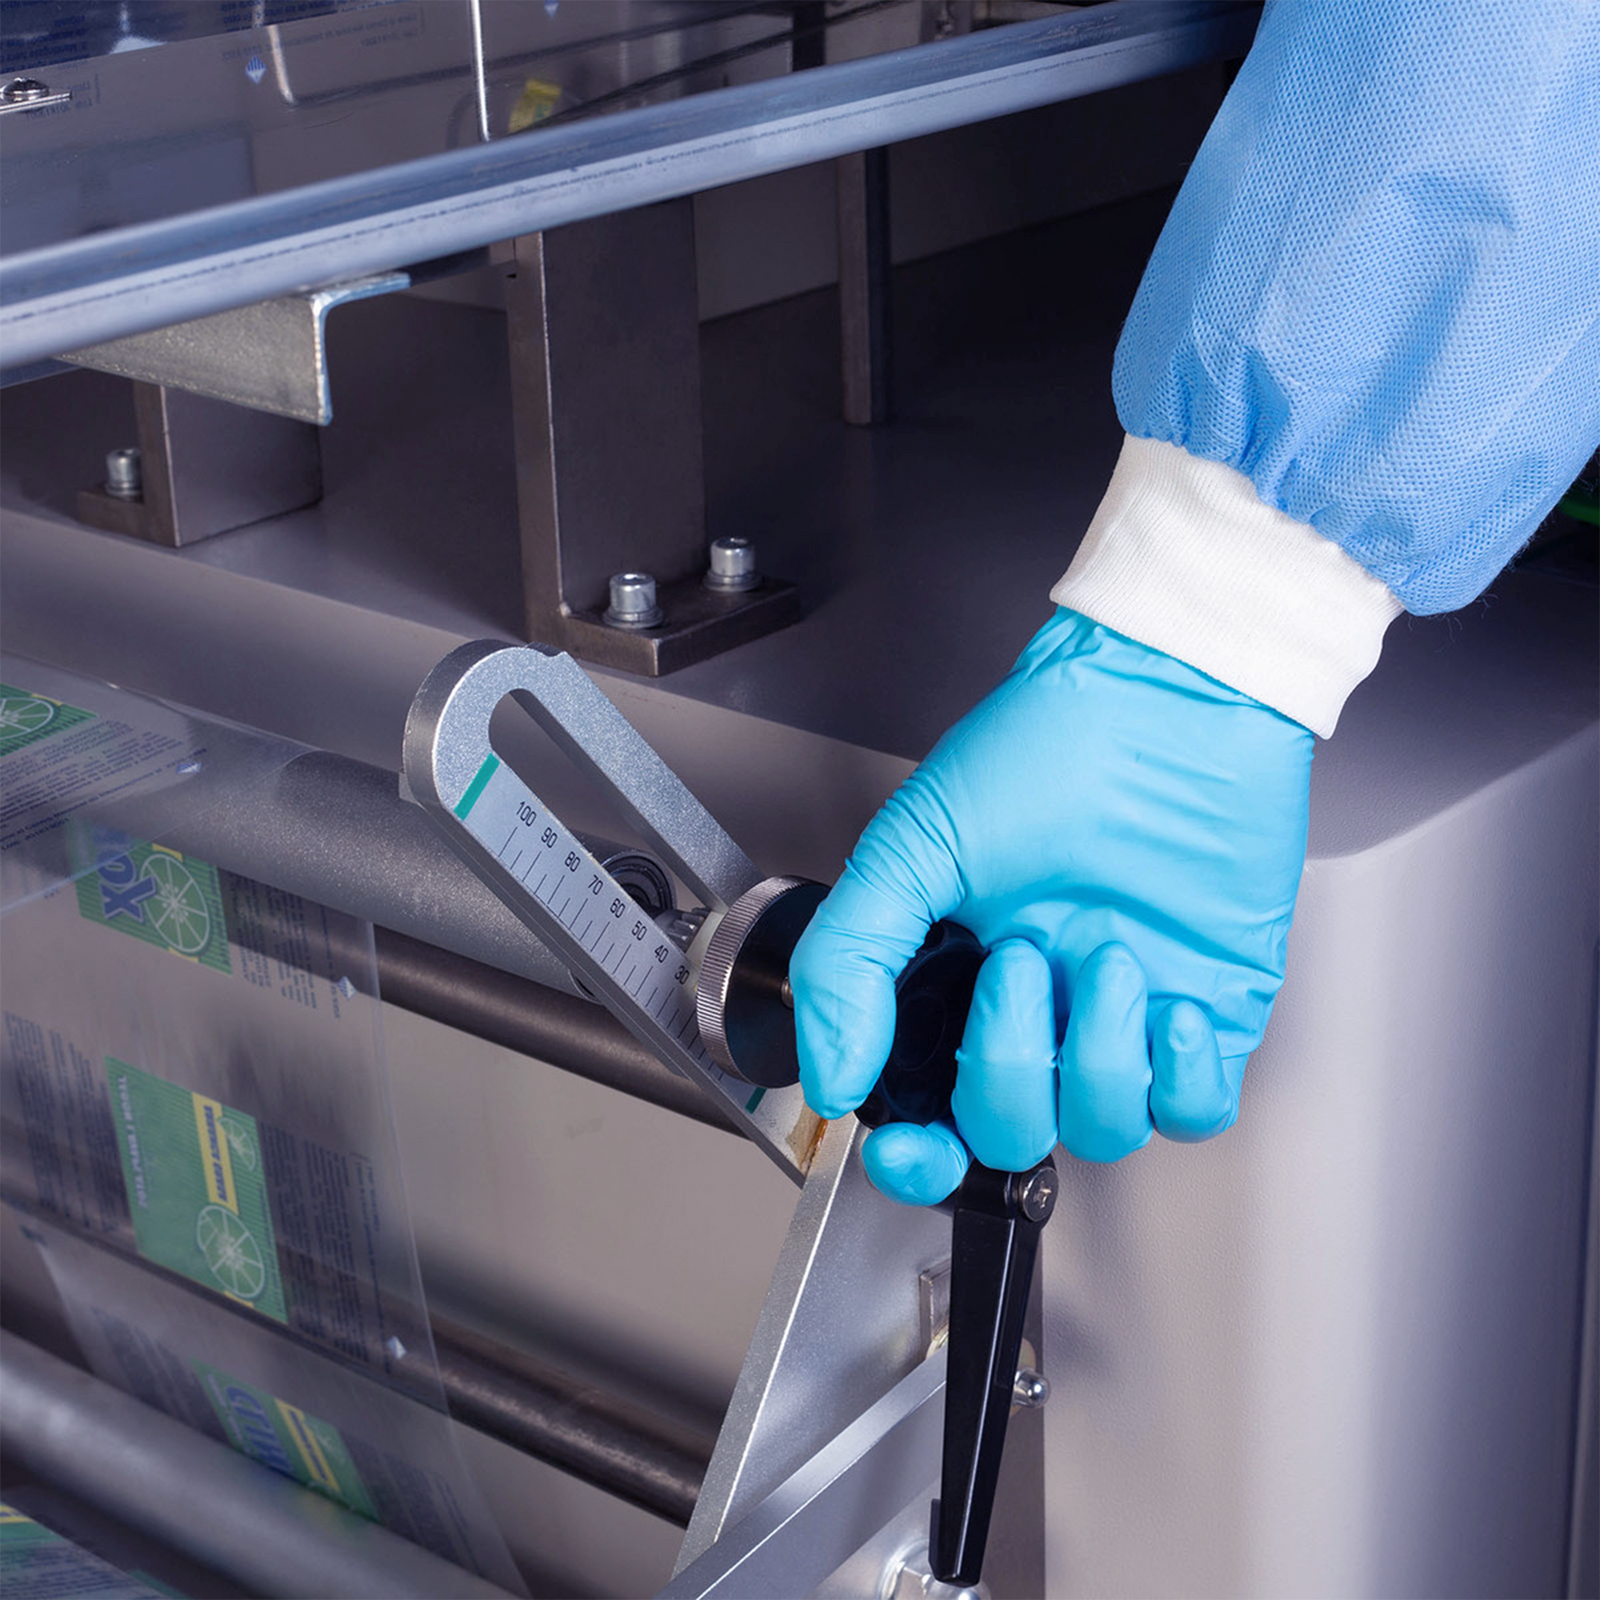 Operator wearing blue PPE disposable gloves and a gown can be seen adjusting the machine's packaging film roll dispenser